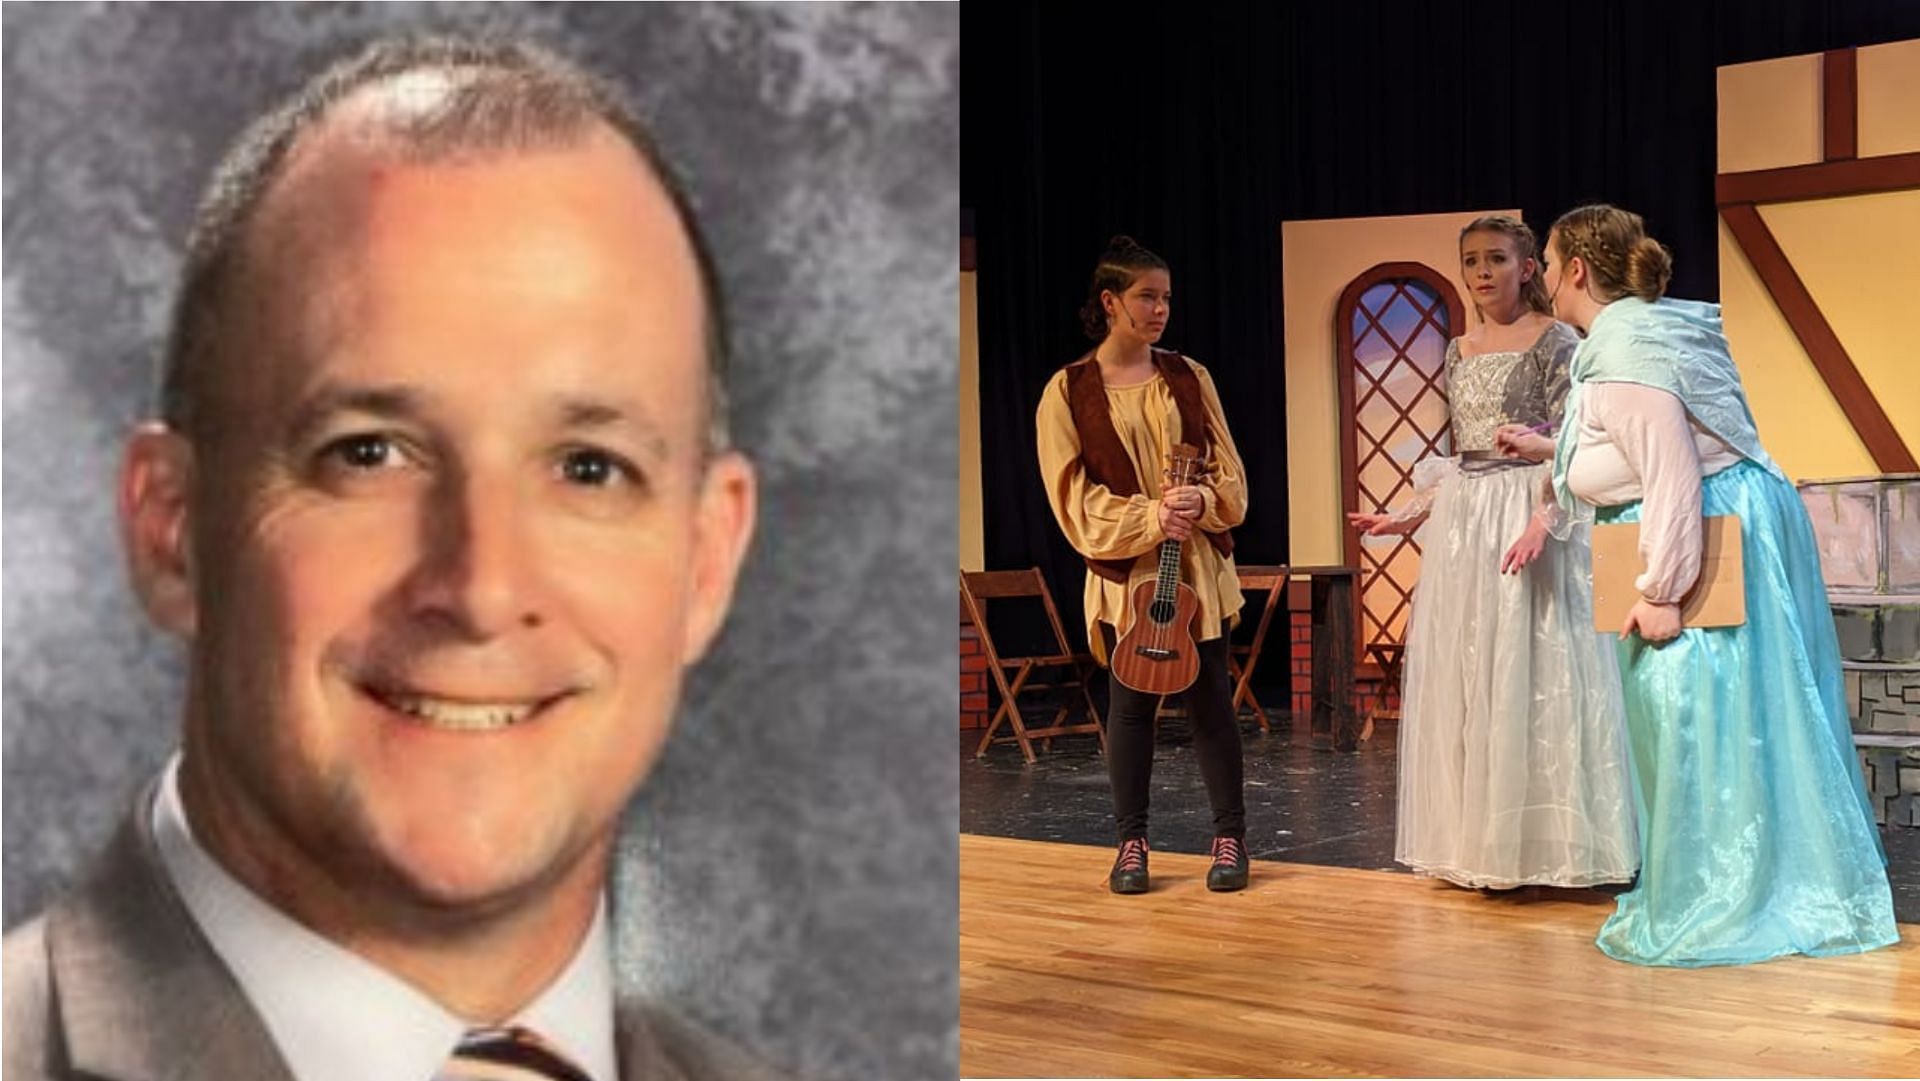 Ohio high school cancels play with Gay character after Pastor complains